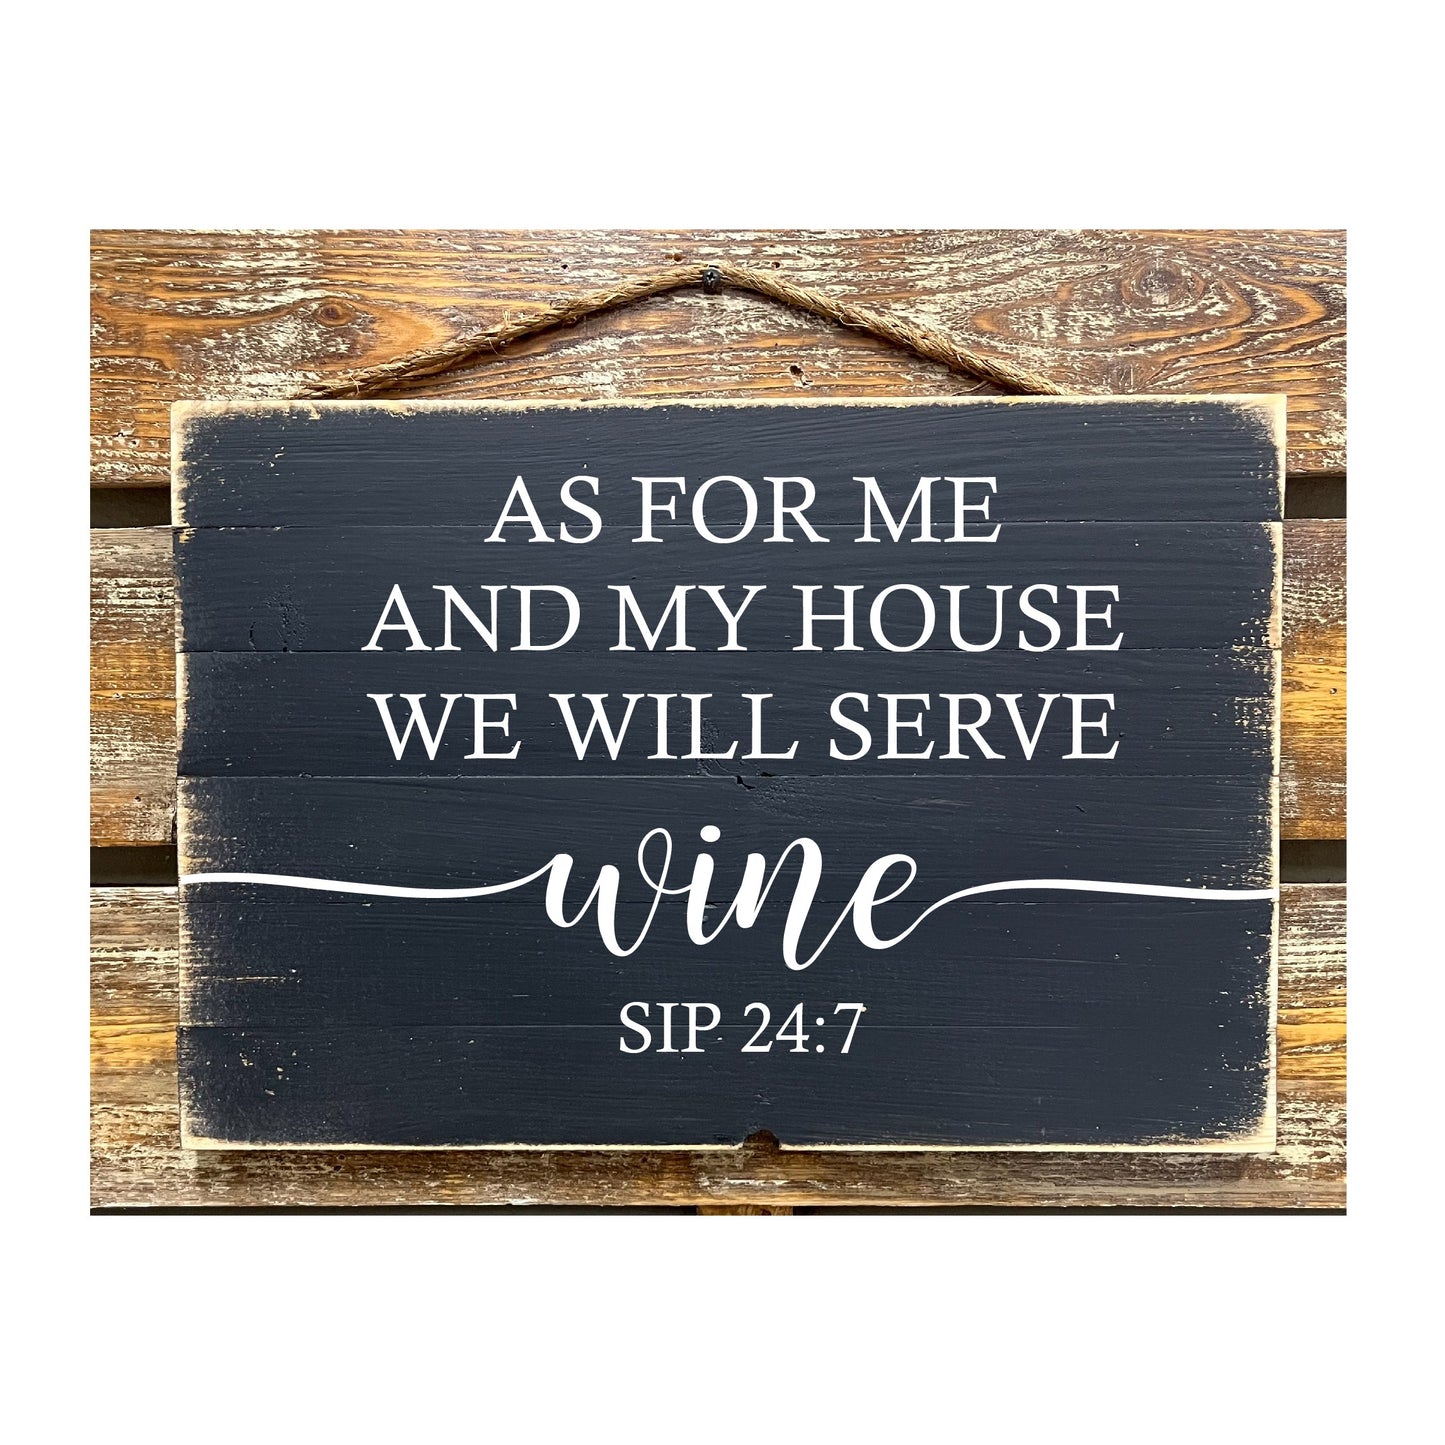 As For Me And My House We Will Serve Wine Sip 24:7